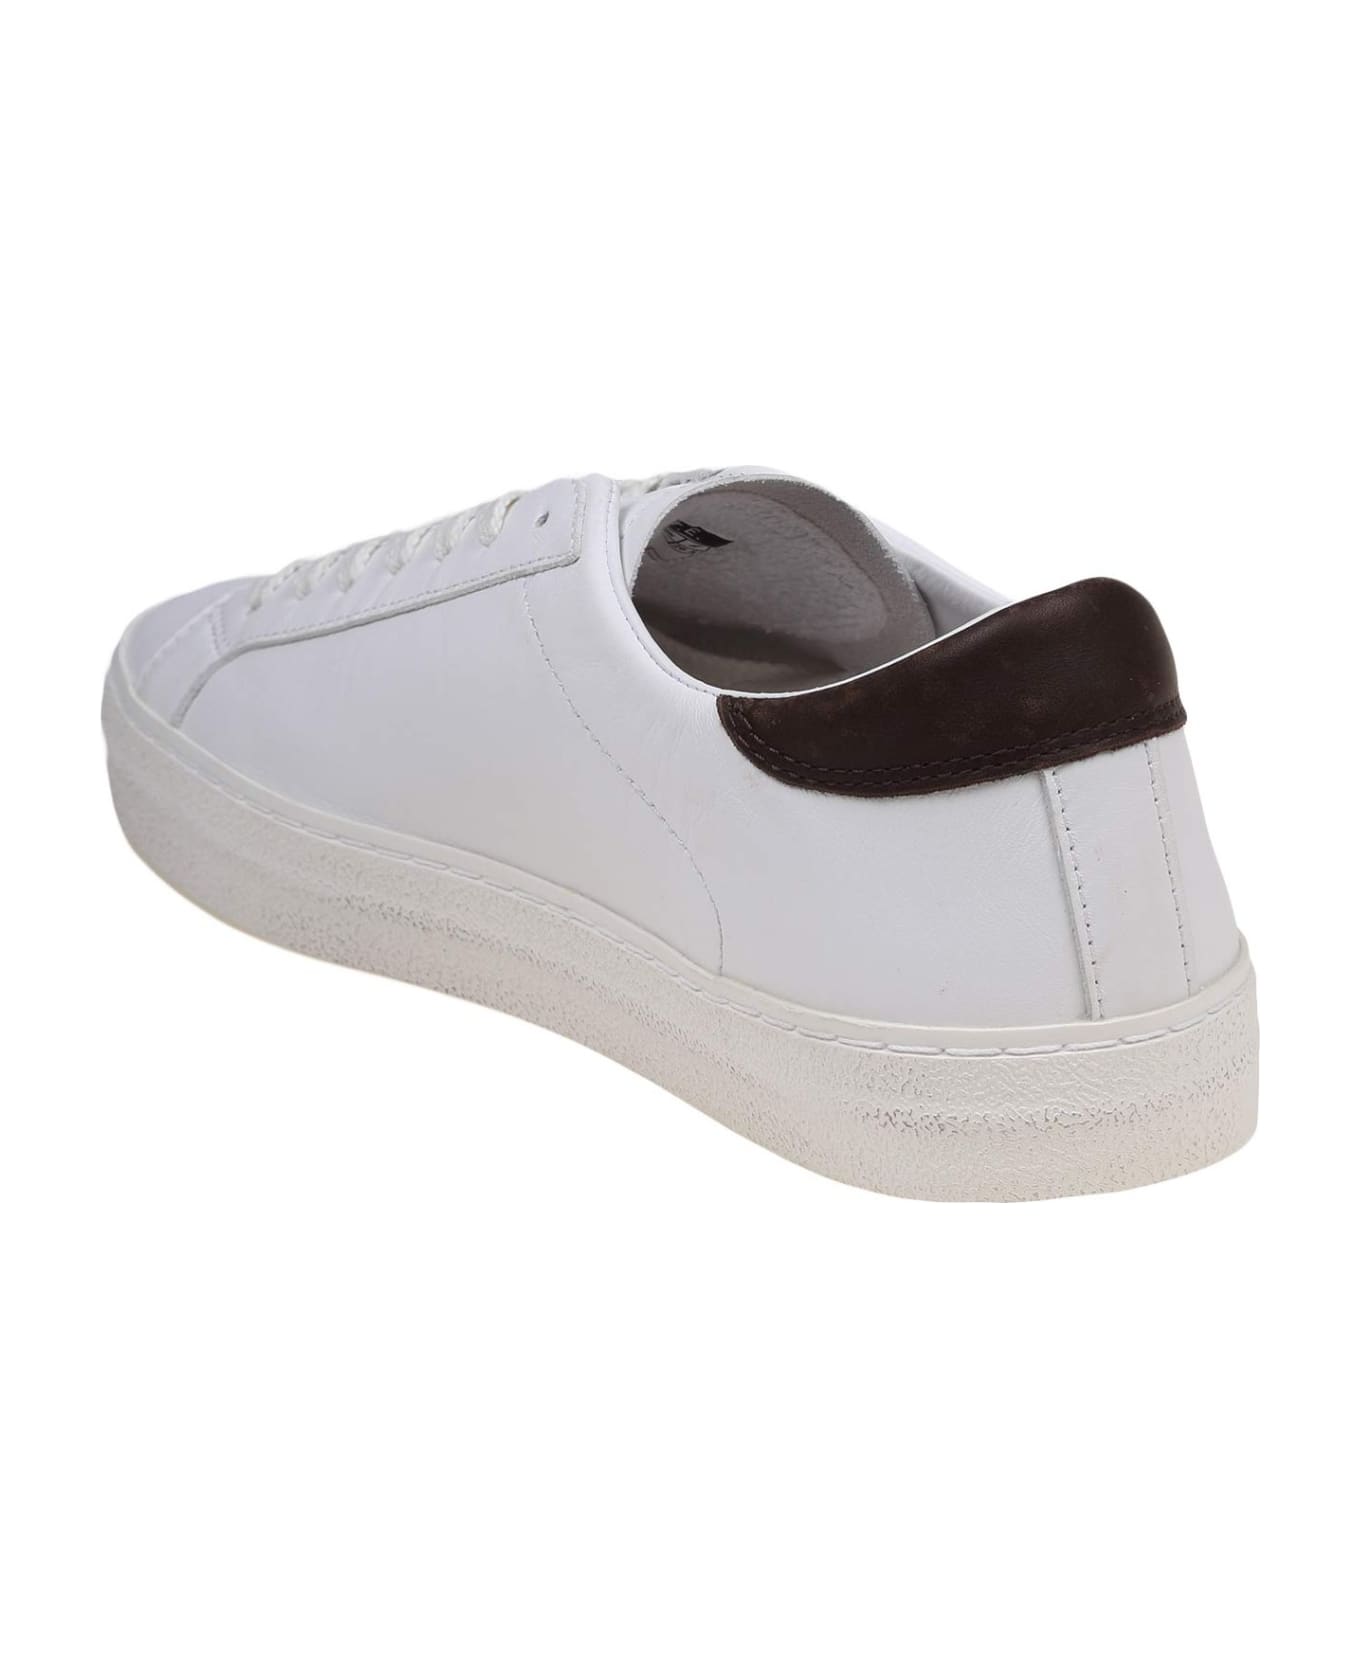 D.A.T.E. Hill Low Vintage Sneakers In White/brown Leather - WHITE/MORO